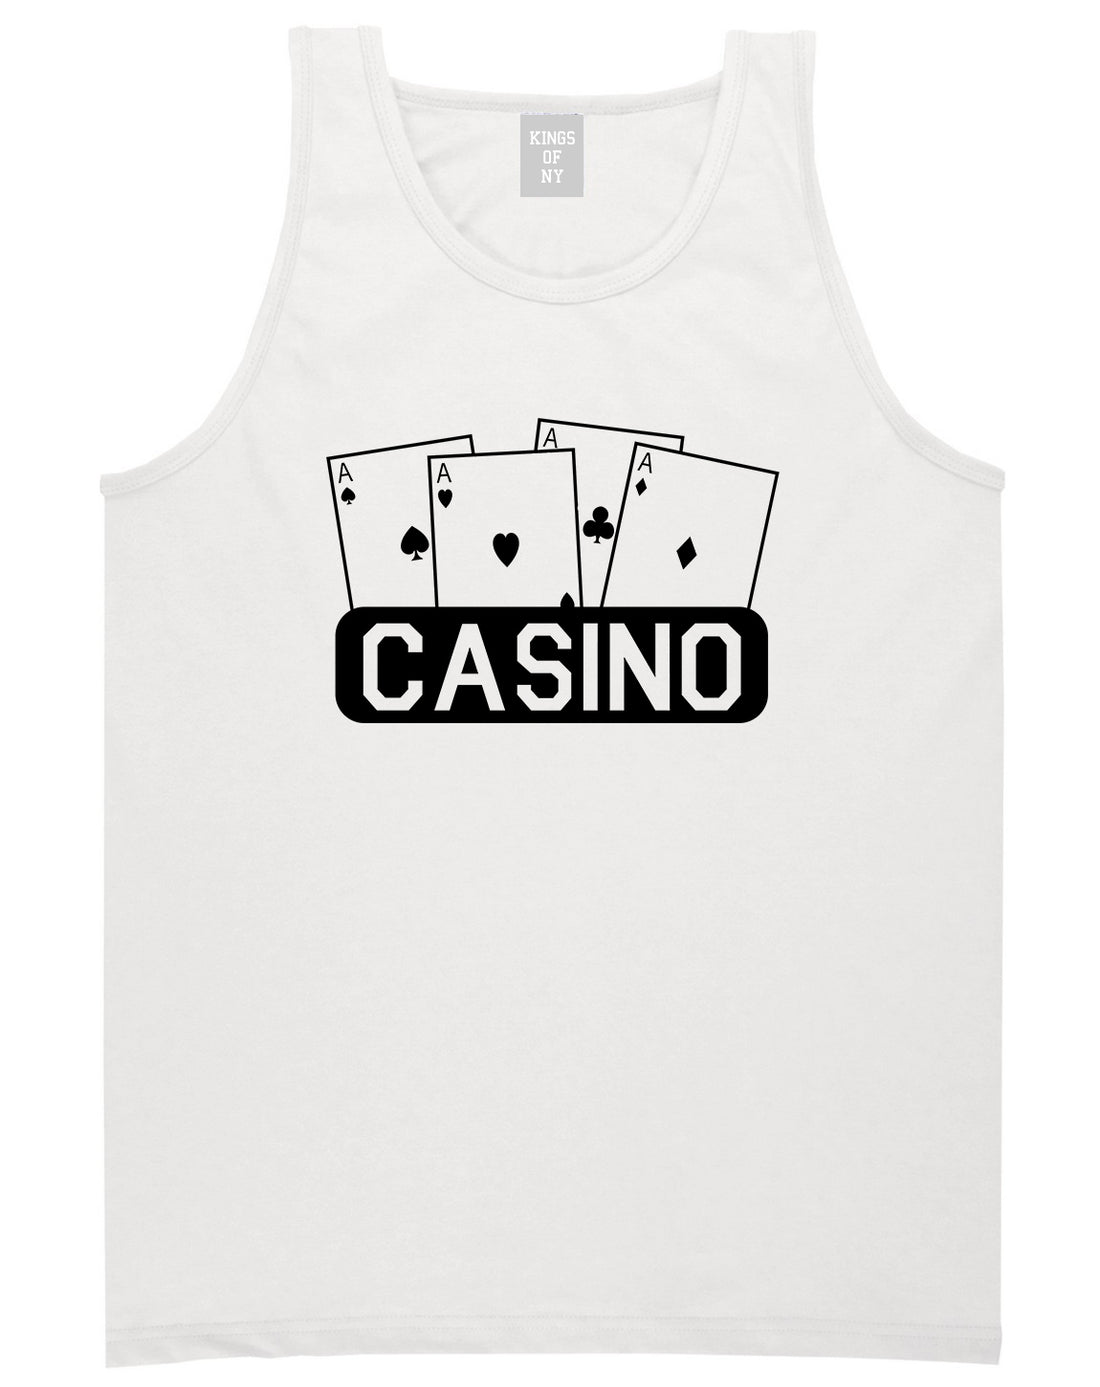 Casino Ace Cards White Tank Top Shirt by Kings Of NY